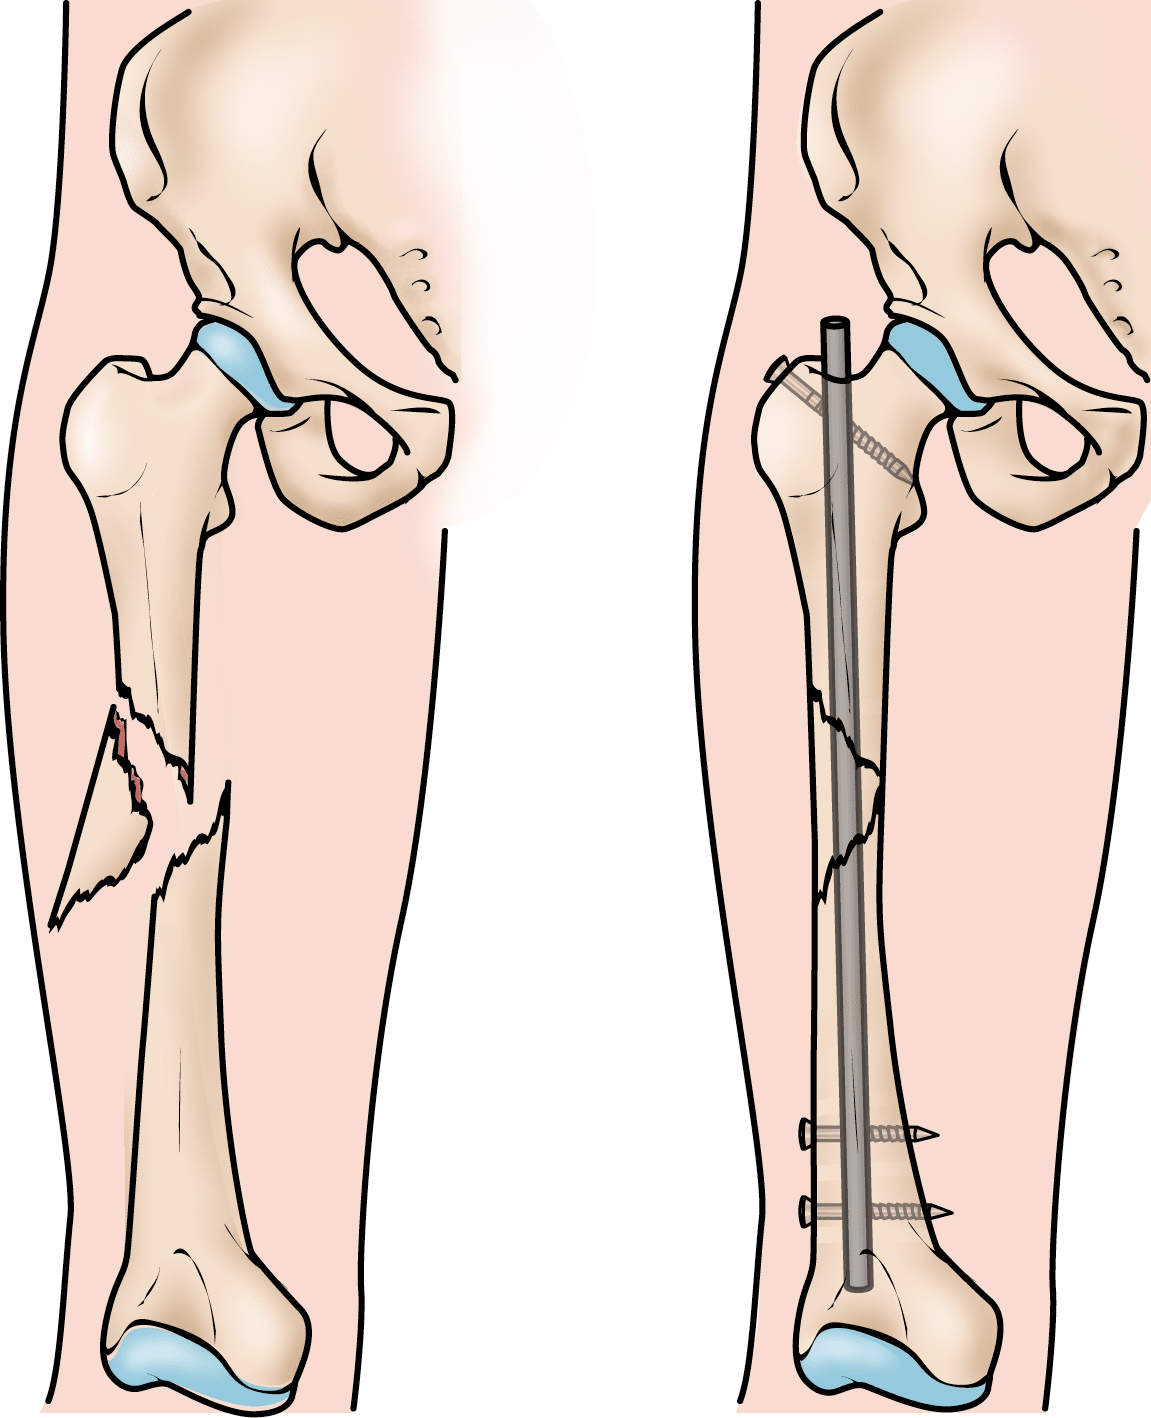 Femur (thighbone) fracture treated with intramedullary nail